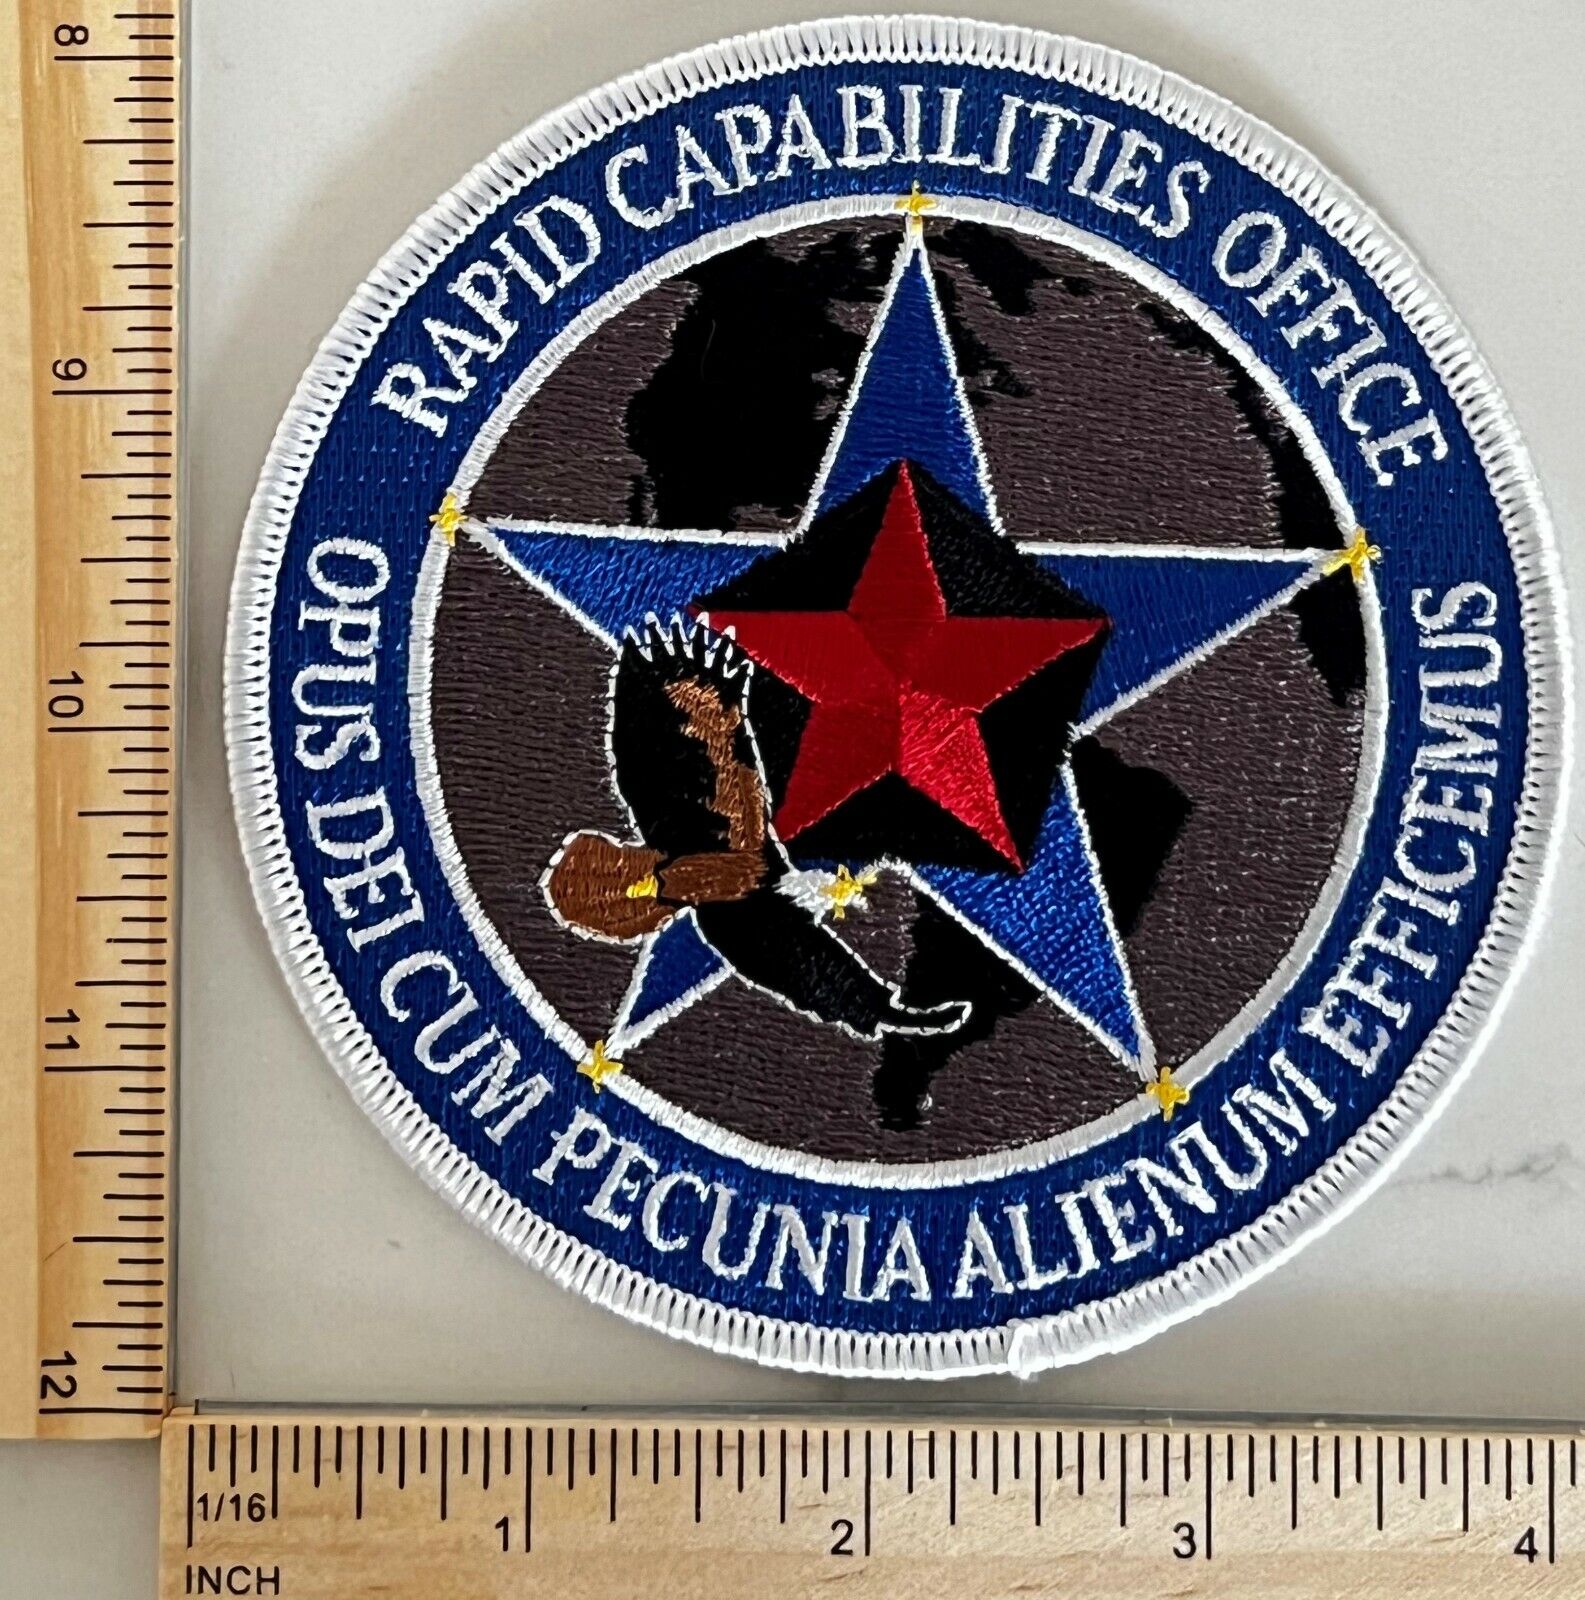 RARE - BLACK OPS MILITARY PATCH – RAPID CAPABILITIES OFFICE WASHINGTON DC